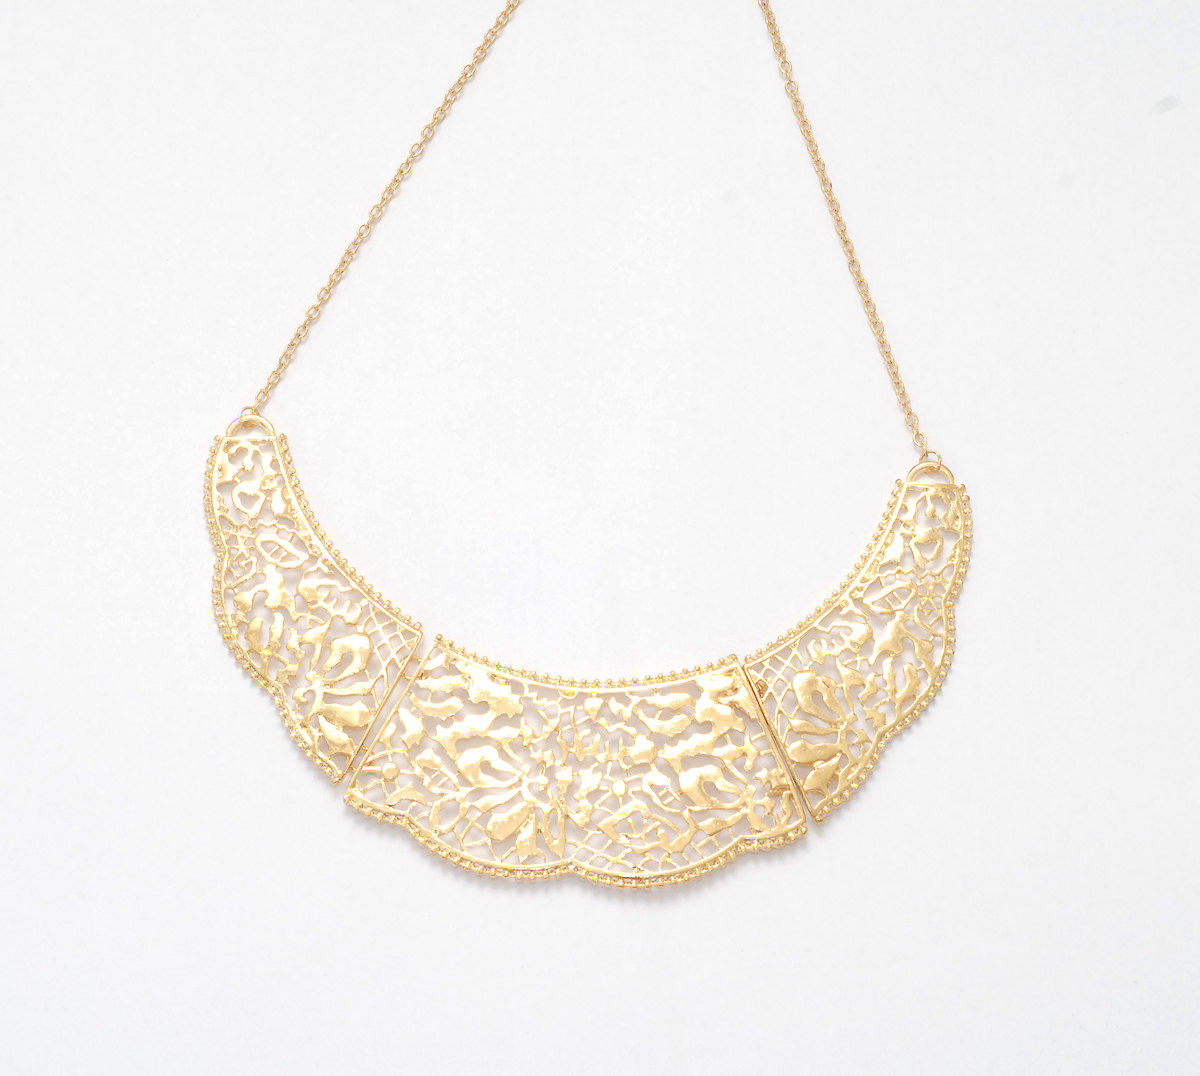 Gold Filigree Statement Necklace, Golden Bib Necklace, Gold Collar Necklace Jewelry